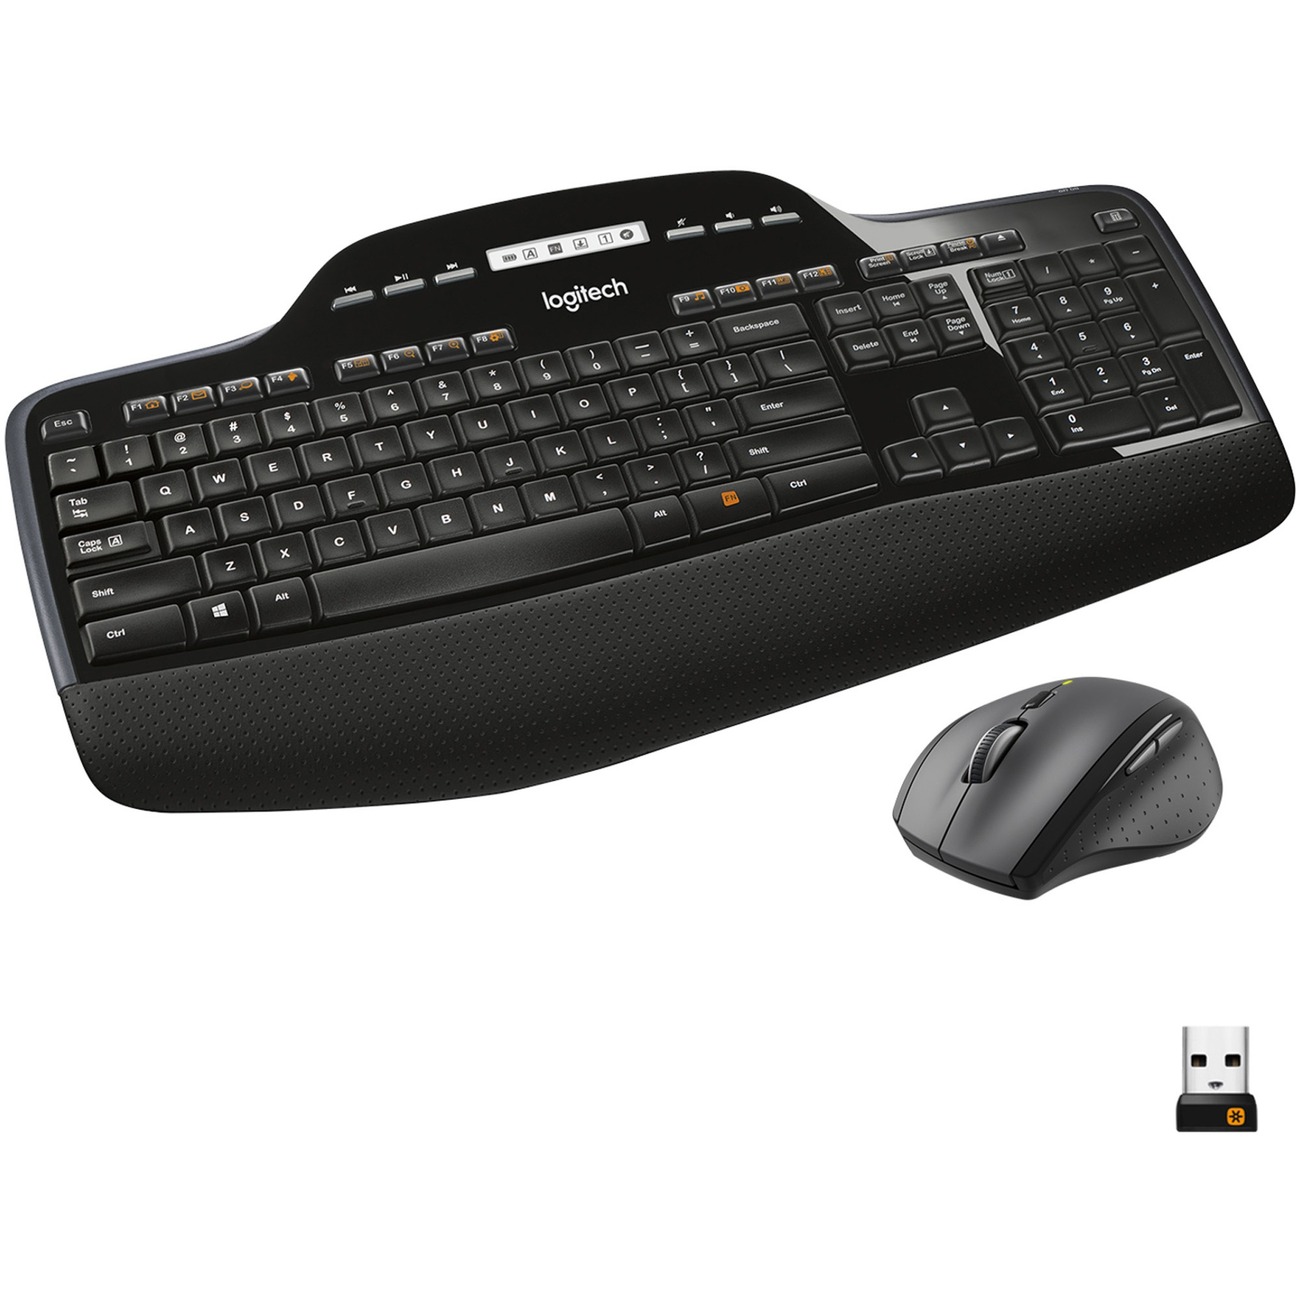 Mk710 Wireless Keyboard + Mouse Combo, 2.4 Ghz Frequency/30 Ft Wireless Range, Black - Envision Xpress